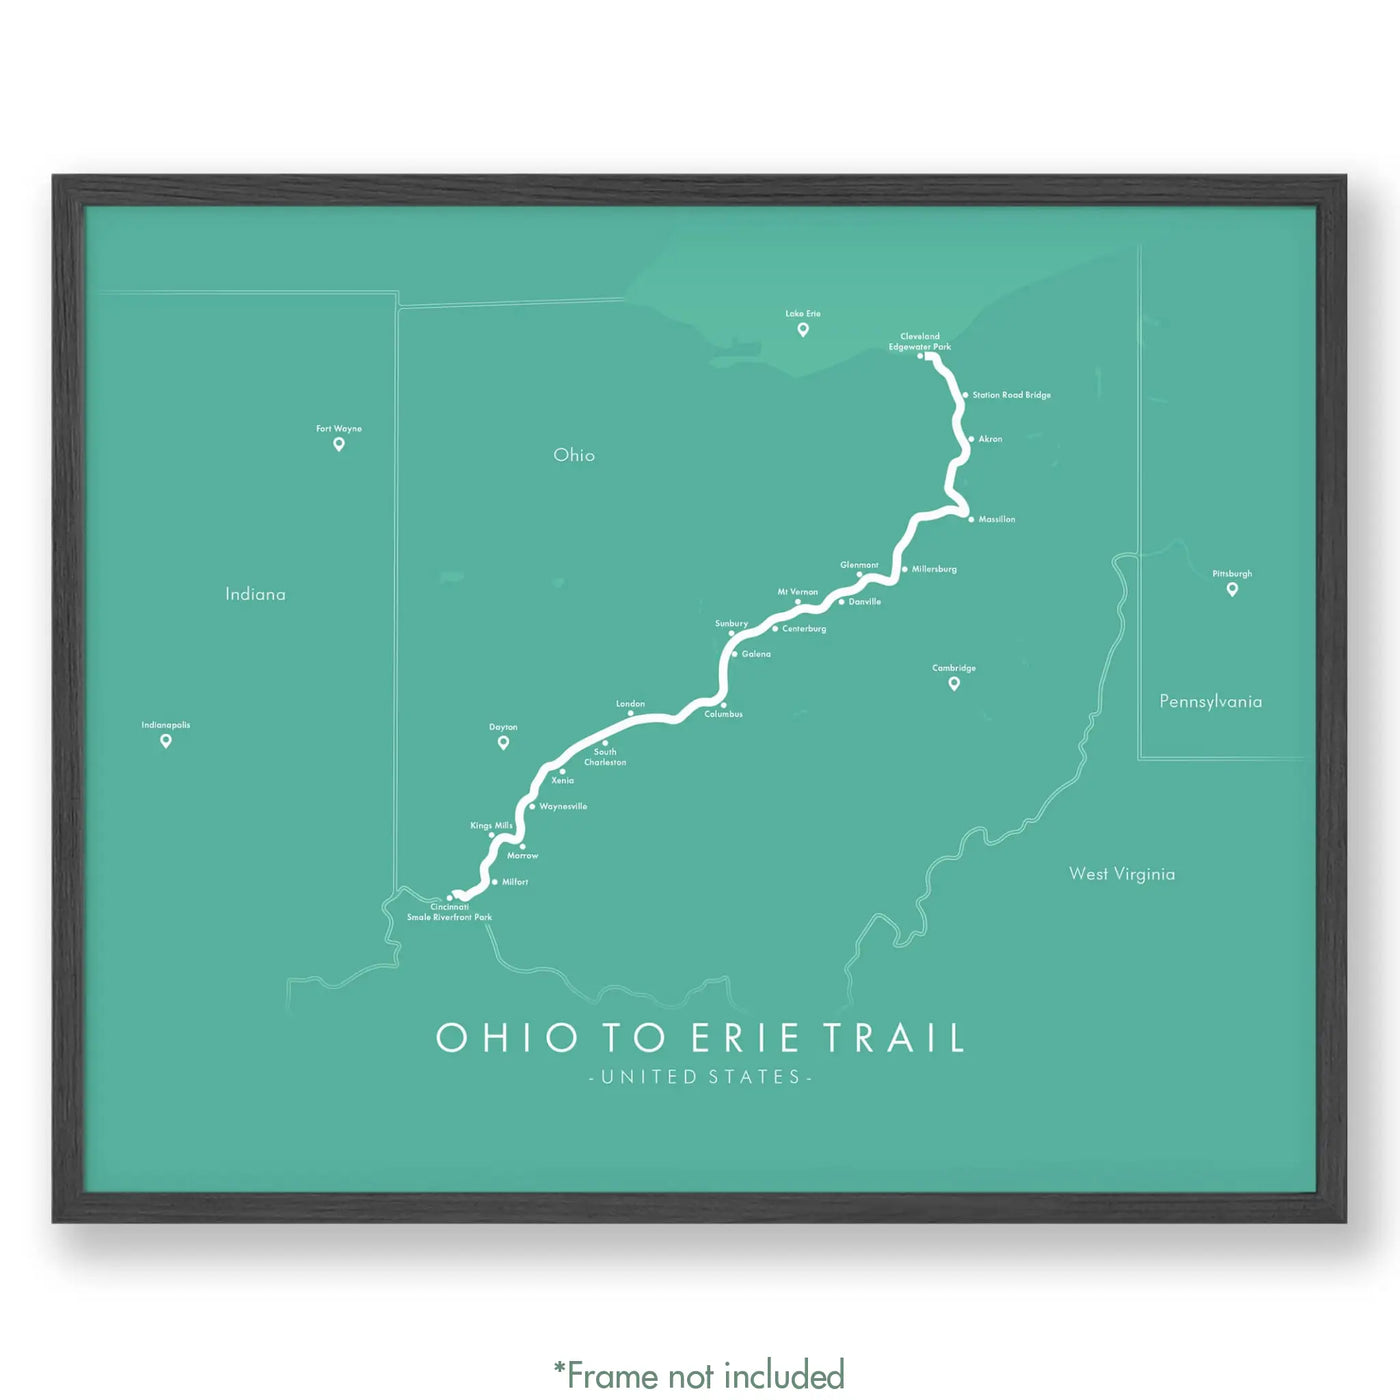 Trail Poster of Ohio to Erie Trail - Teal